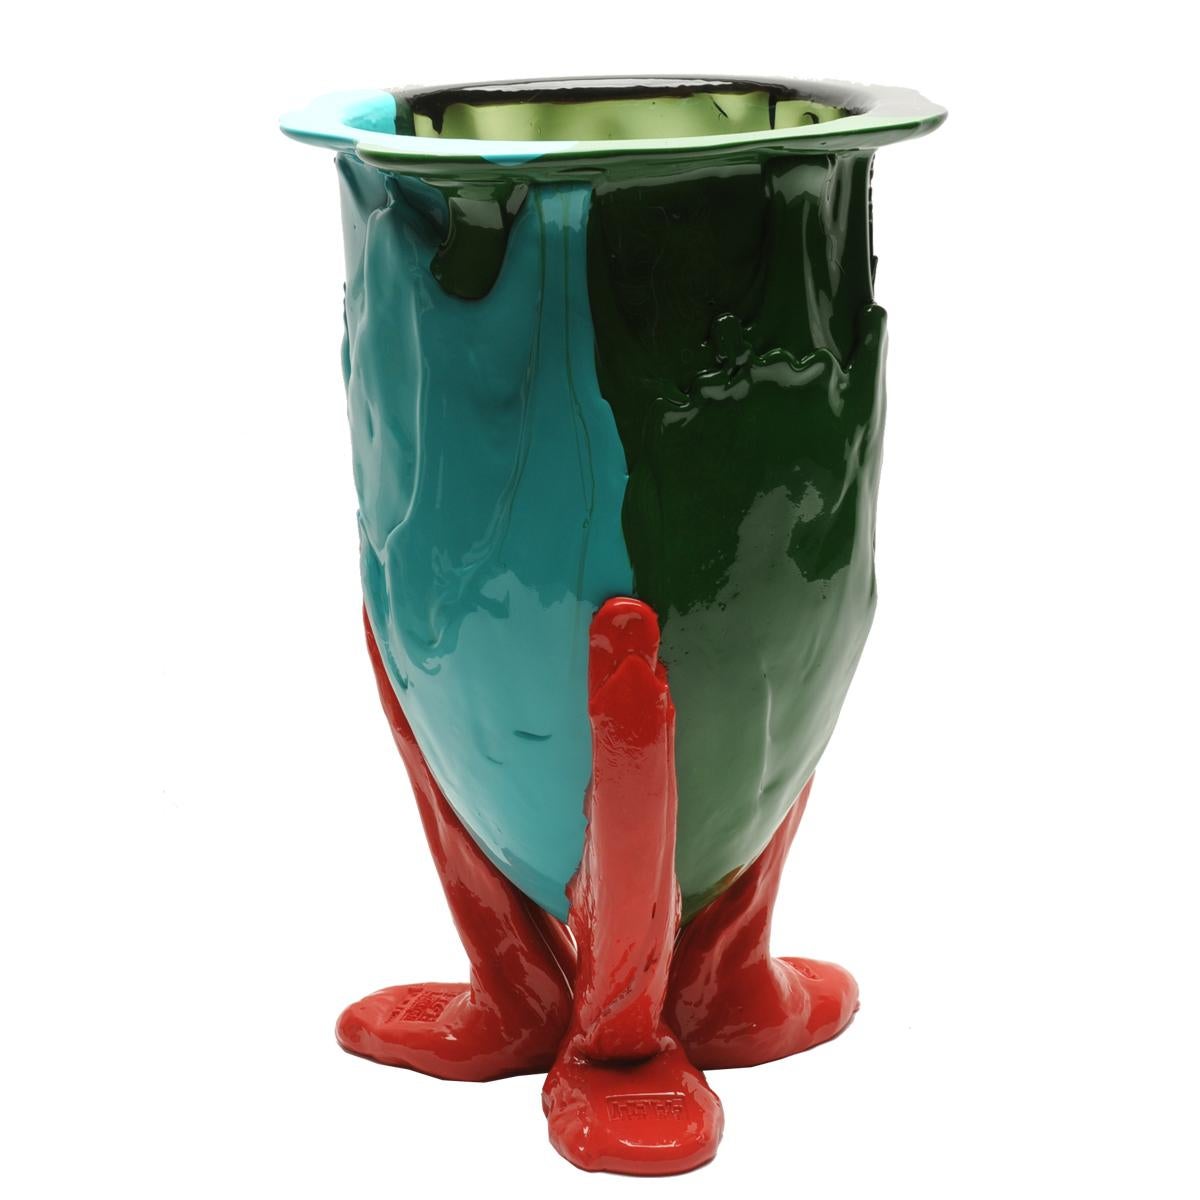 Arts and Crafts Contemporary Gaetano Pesce Amazonia XL Vase Resin Green Turquoise Coral Red For Sale